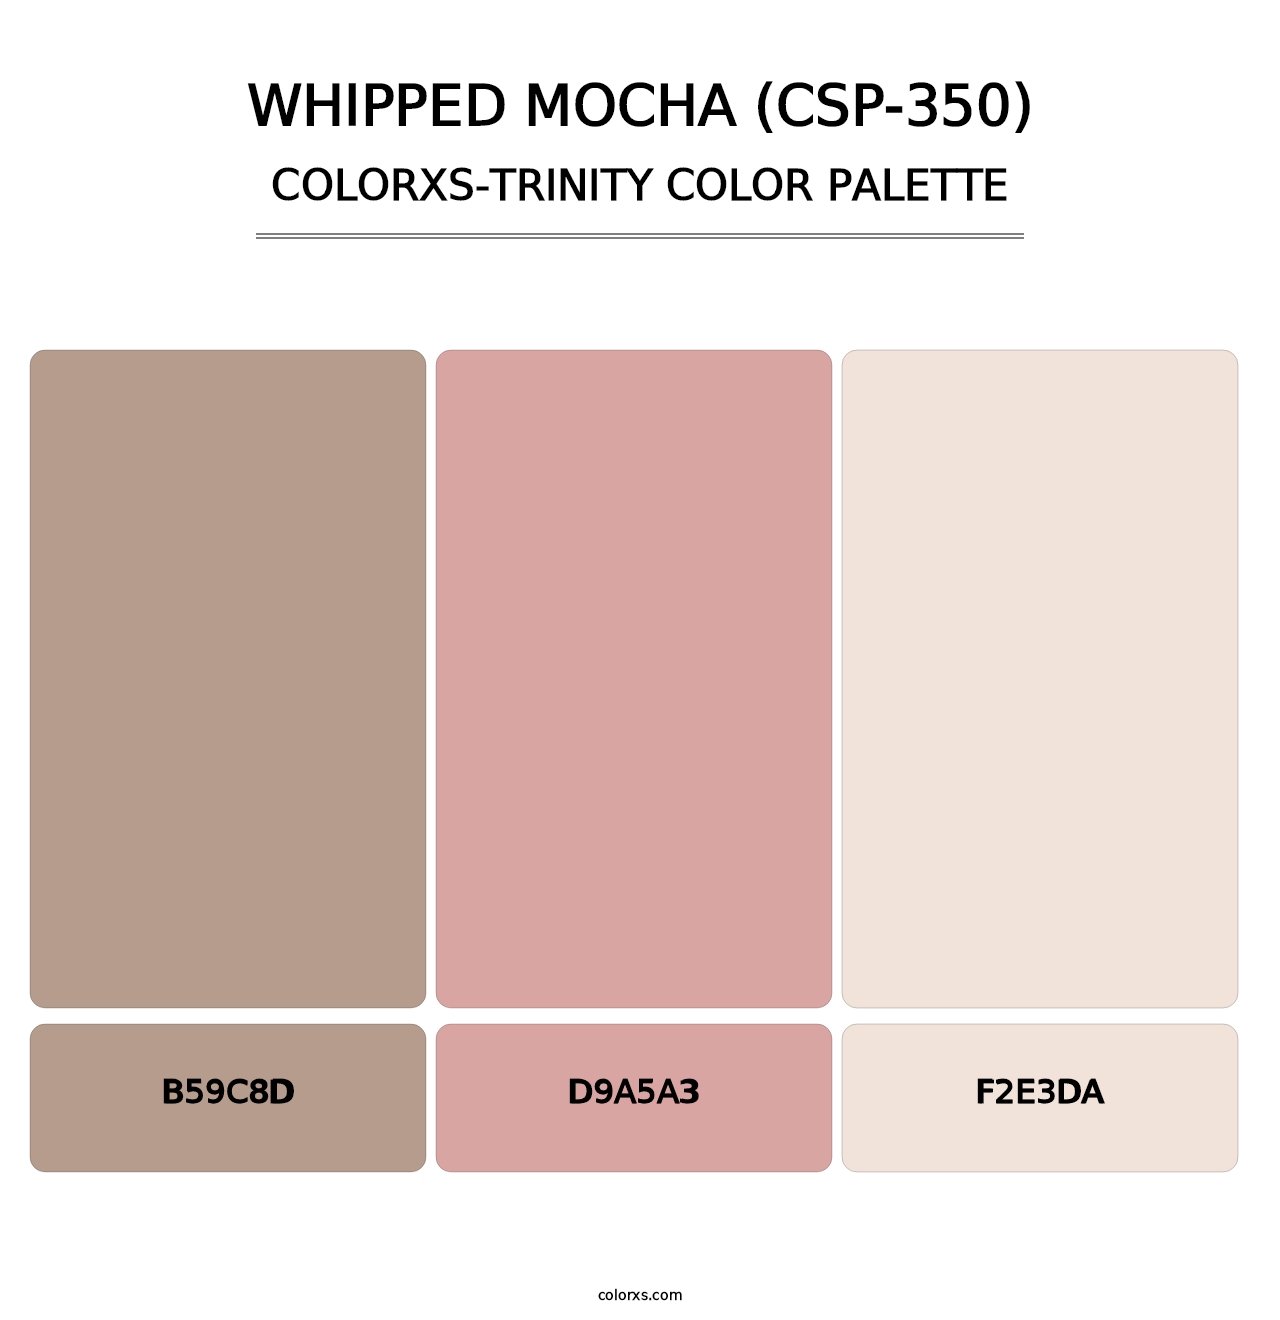 Whipped Mocha (CSP-350) - Colorxs Trinity Palette